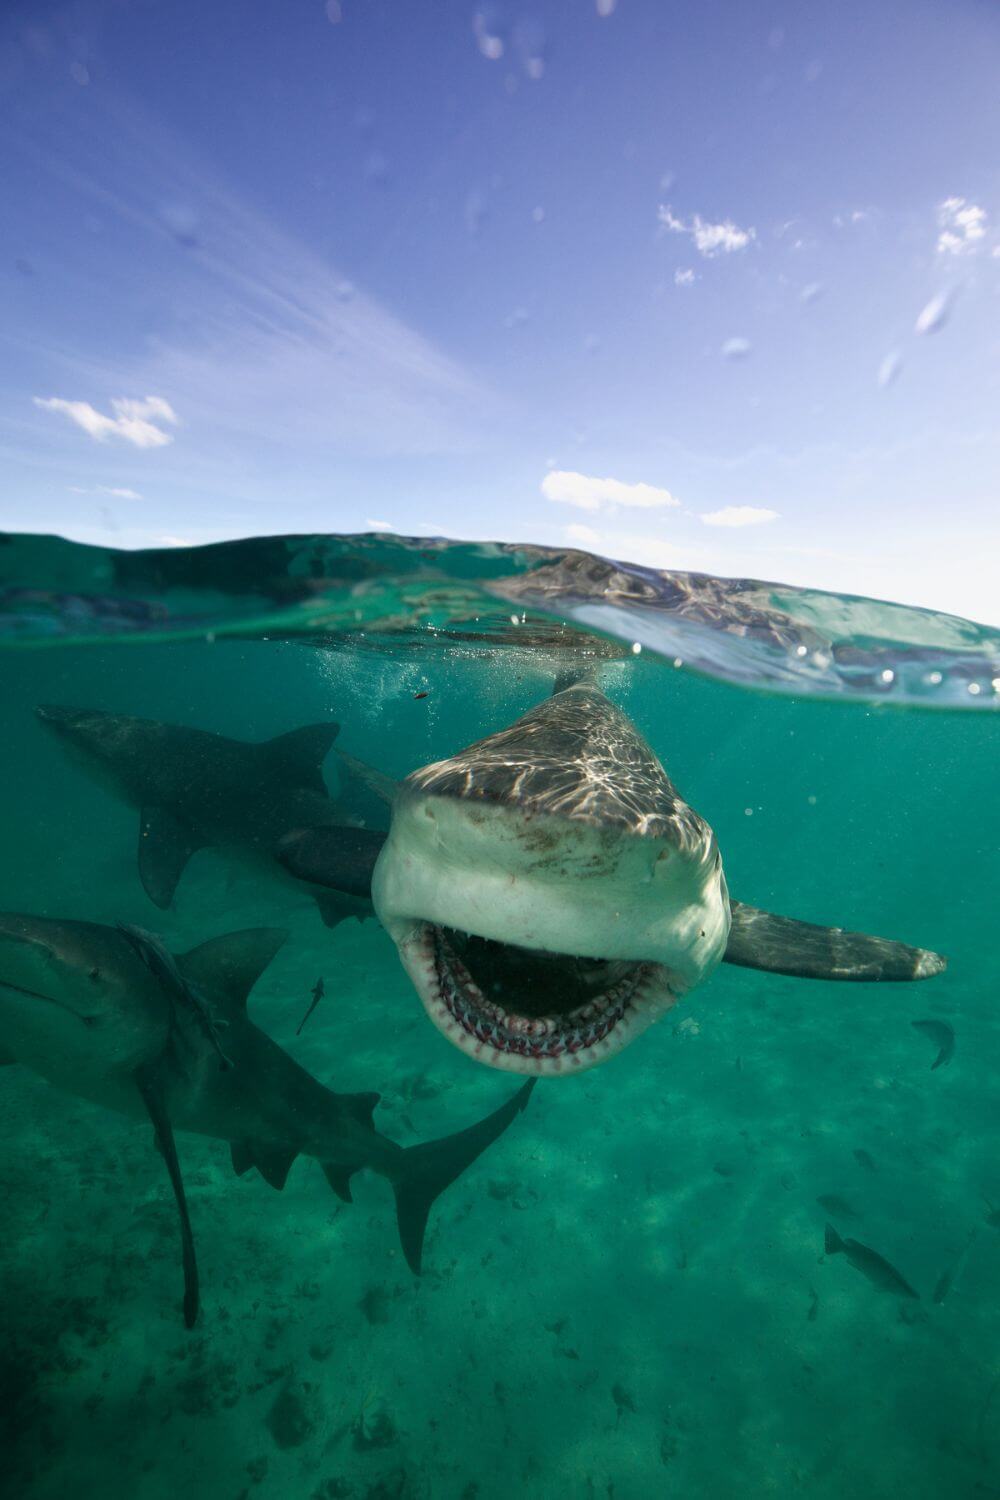 Photo of a bull shark swimming in the waters off the coast of Bimini in the Bahamas.